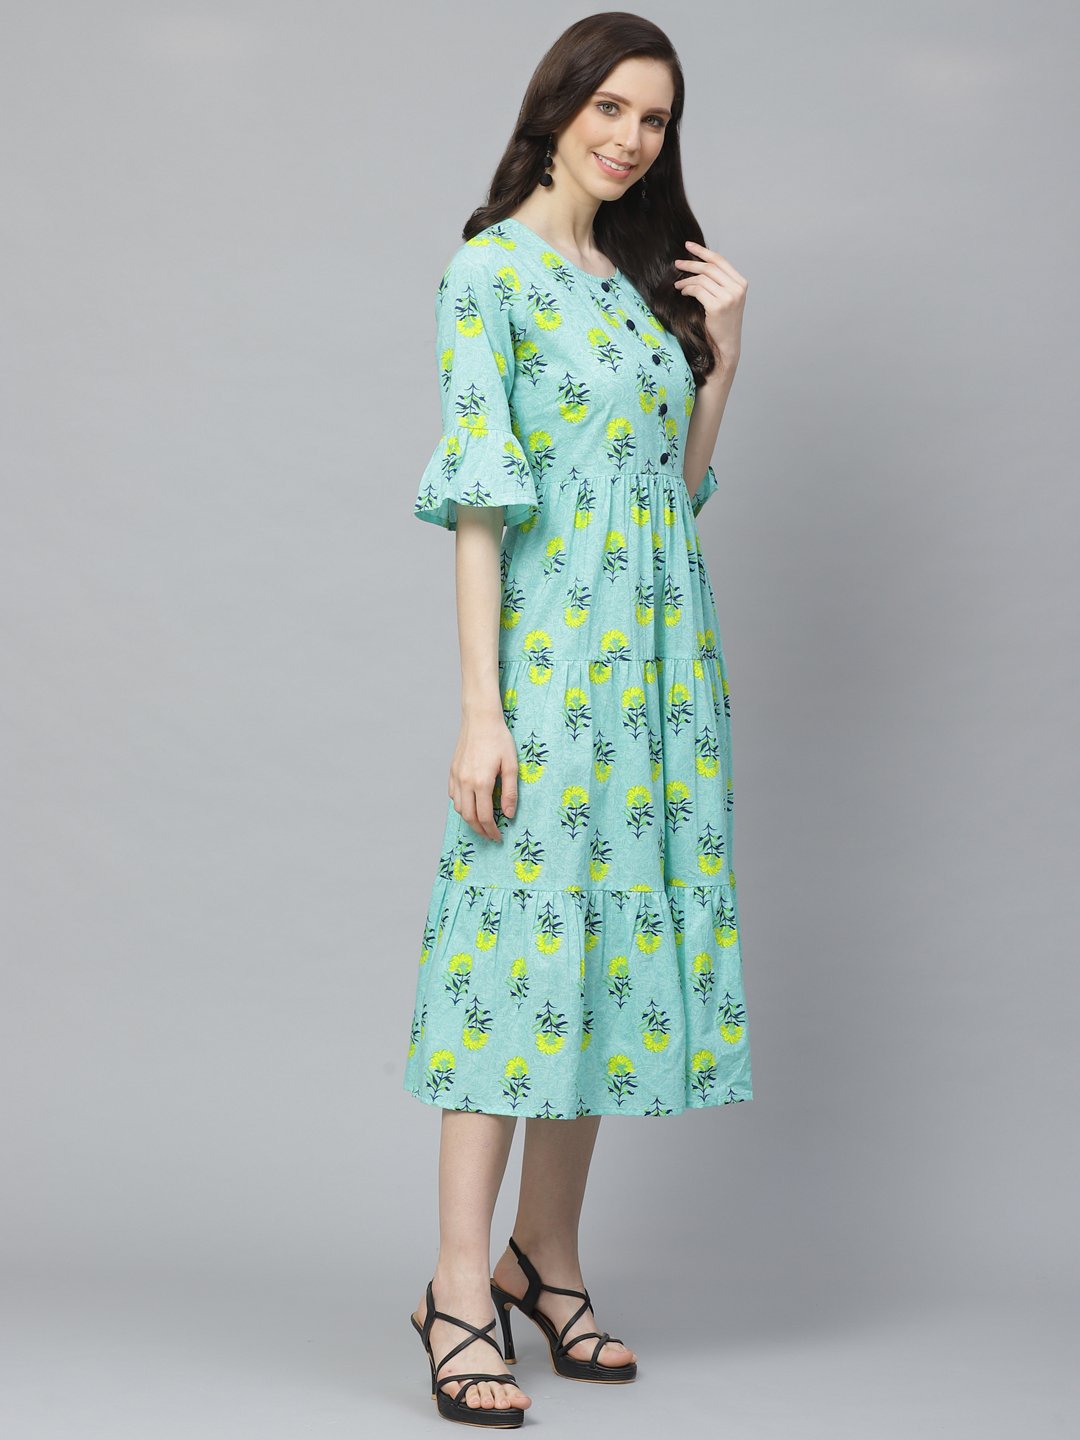 Women's Blue Floral Printed Round Neck Cotton Fit And Flare Dress - Nayo Clothing